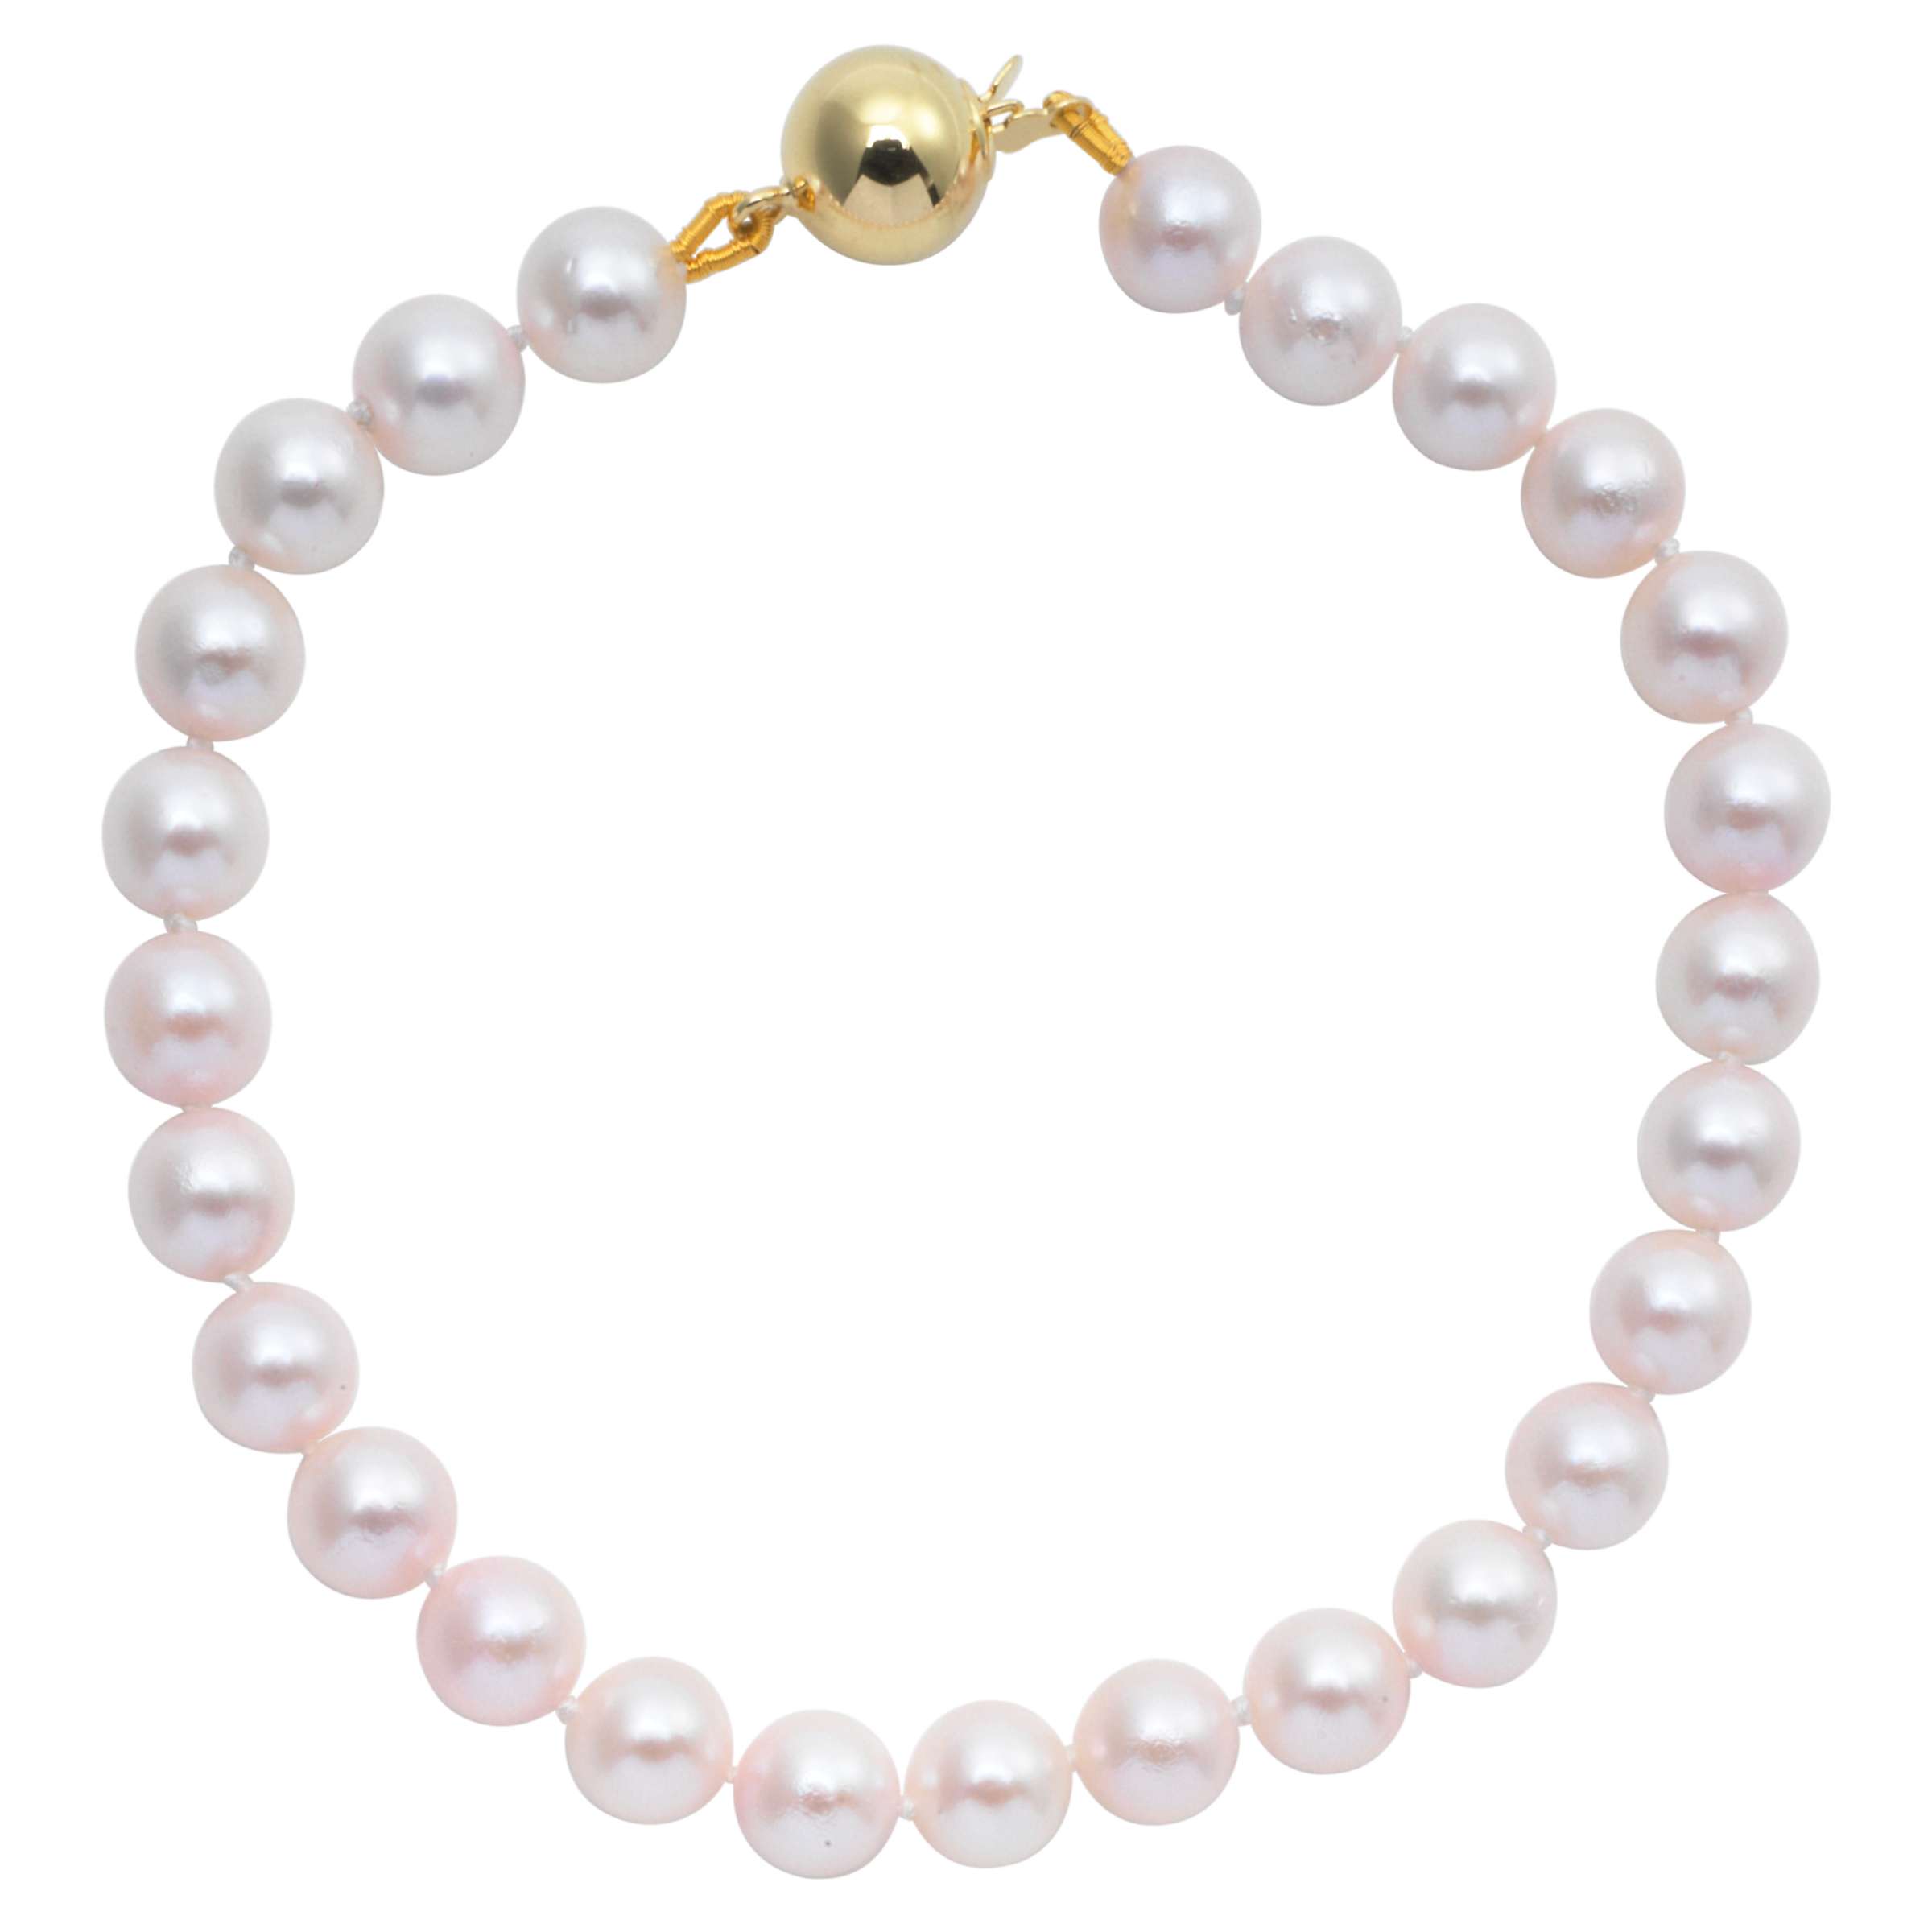 Buy A B Davis Cultured Pearls Knotted 7.5" Bracelet with Gold Clasp Online at johnlewis.com